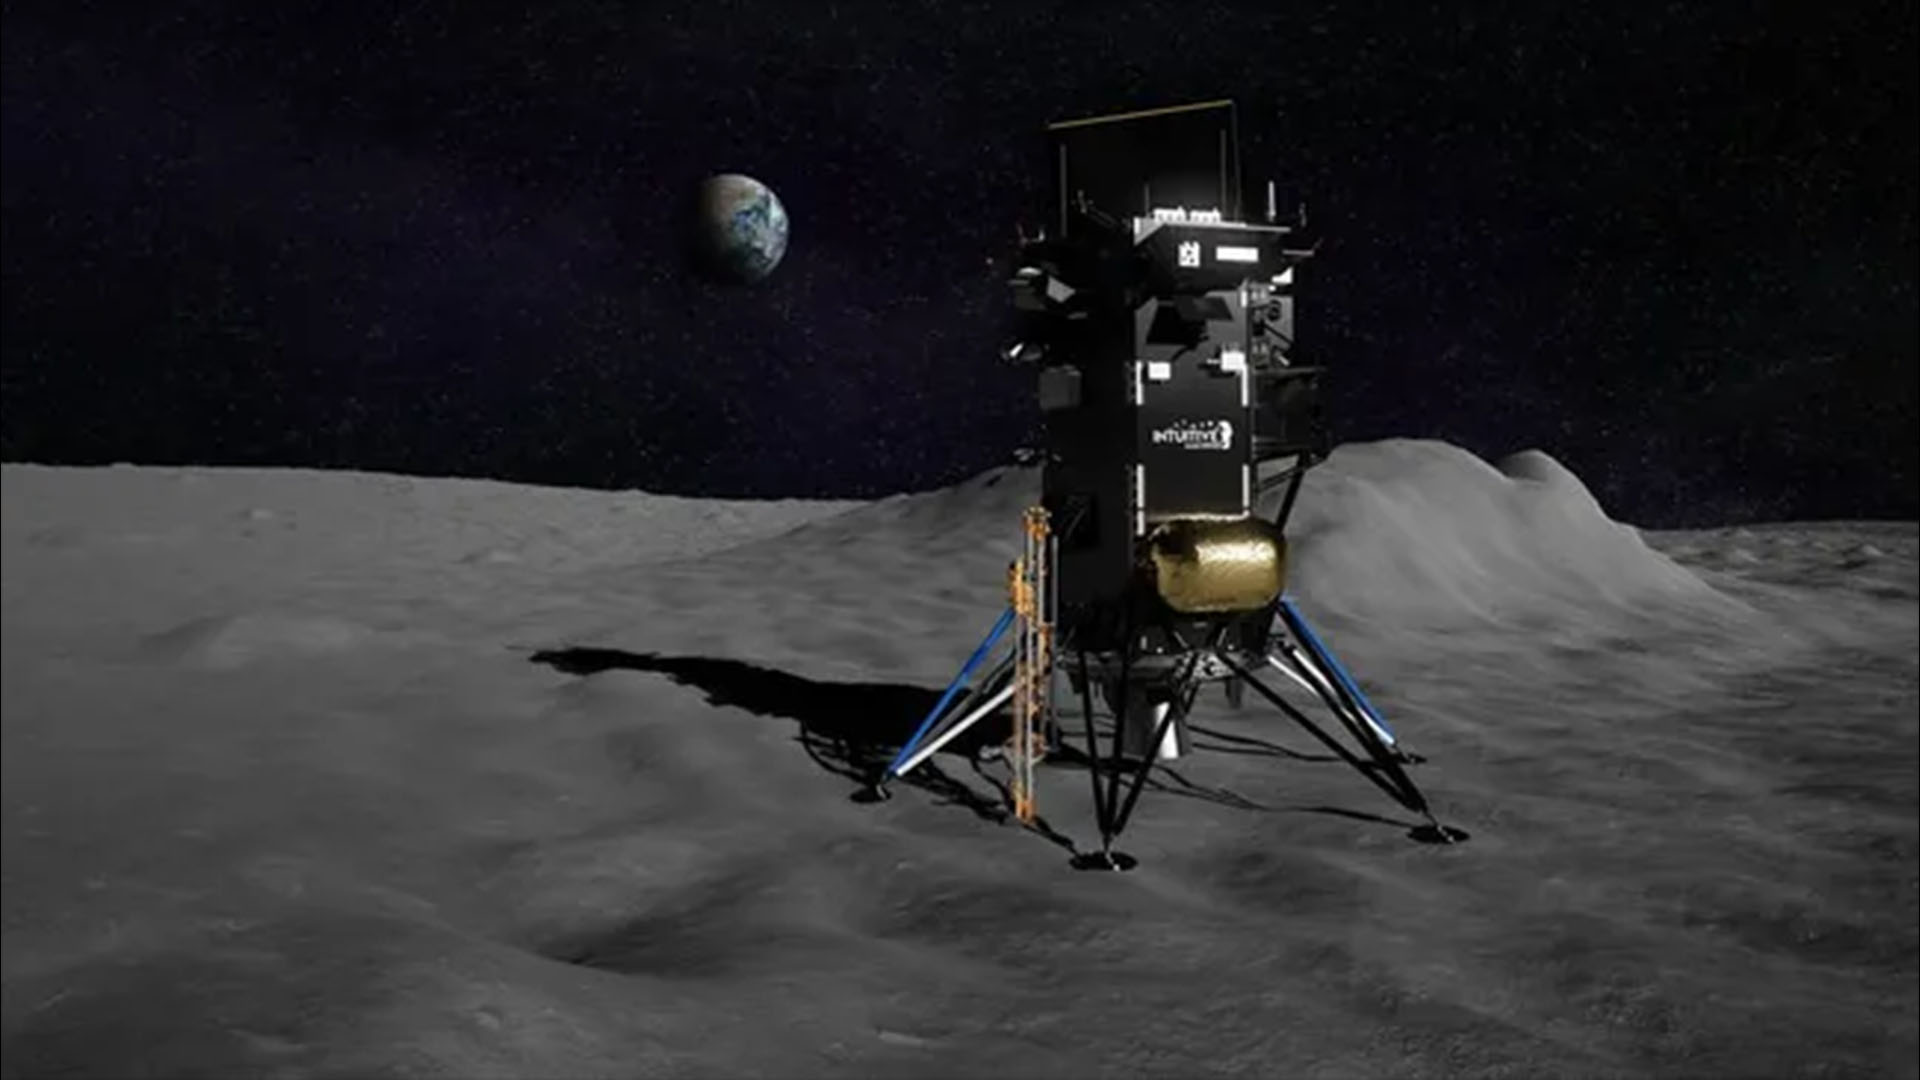 Elon Musk’s SpaceX could launch a private moon lander within weeks